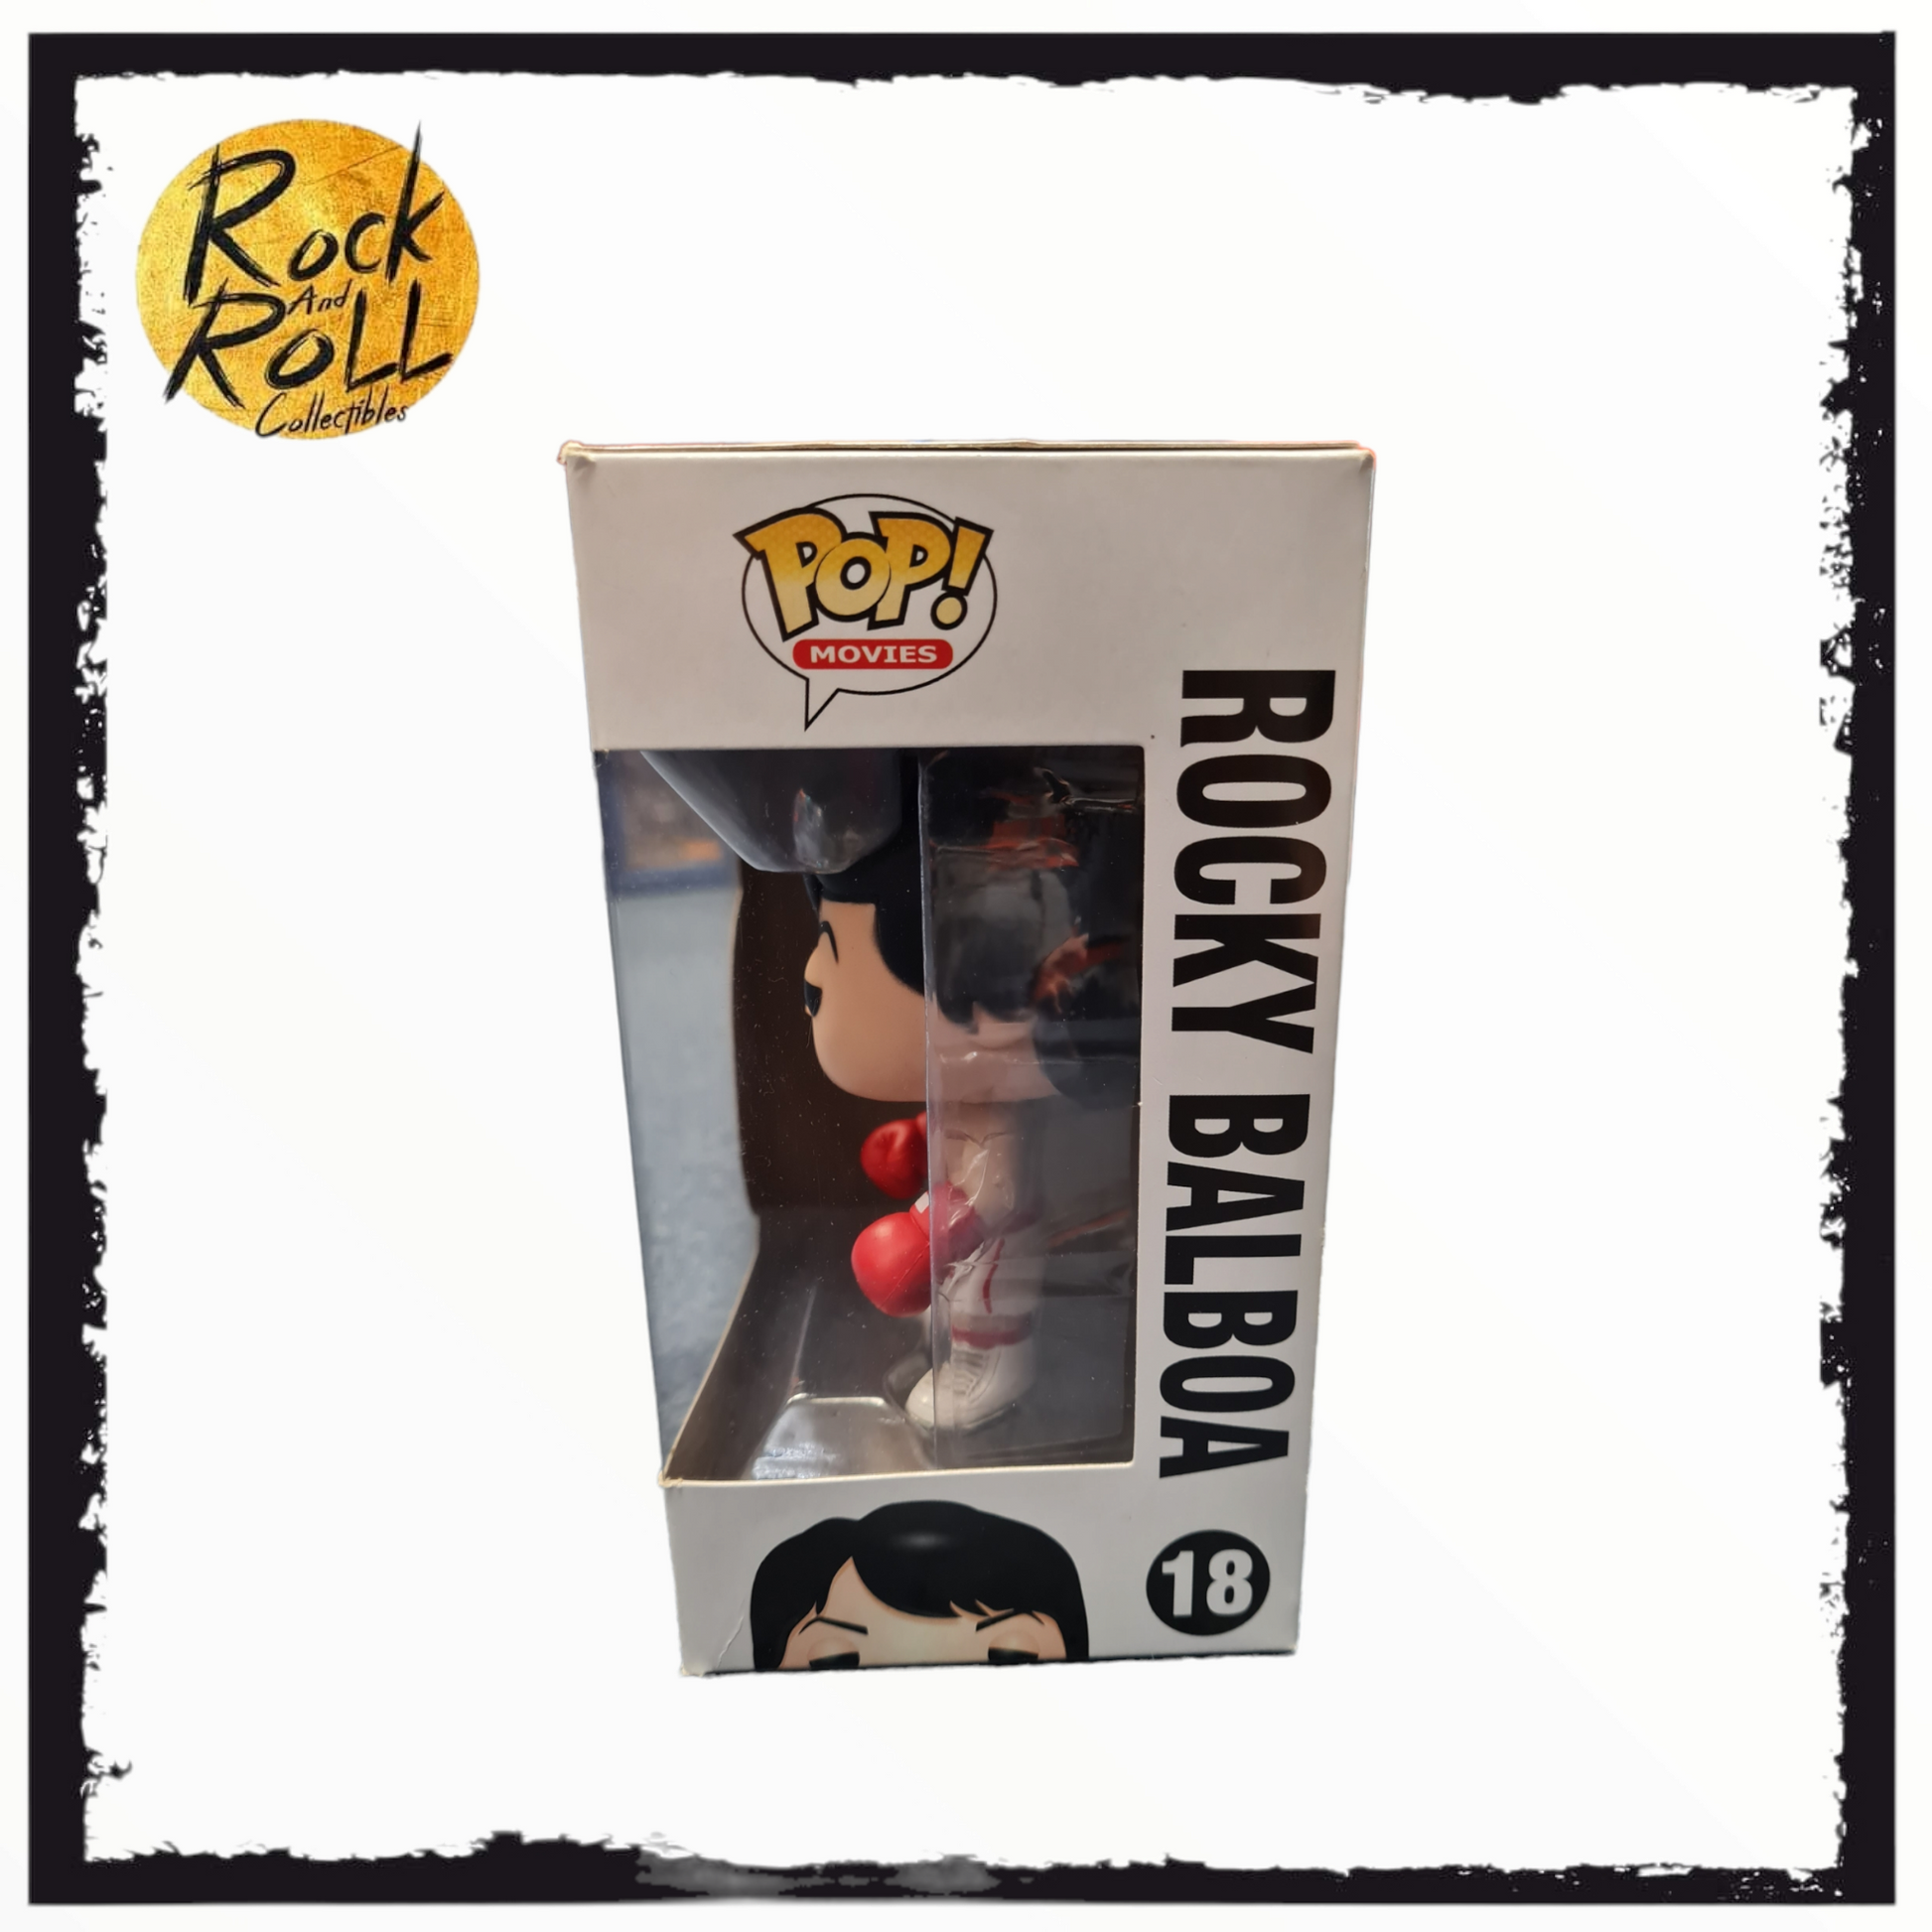 Funko Pop Rocky Balboa 18 Vinyl Novelty Gift or Collectable Item BOXED  BRAND NEW 